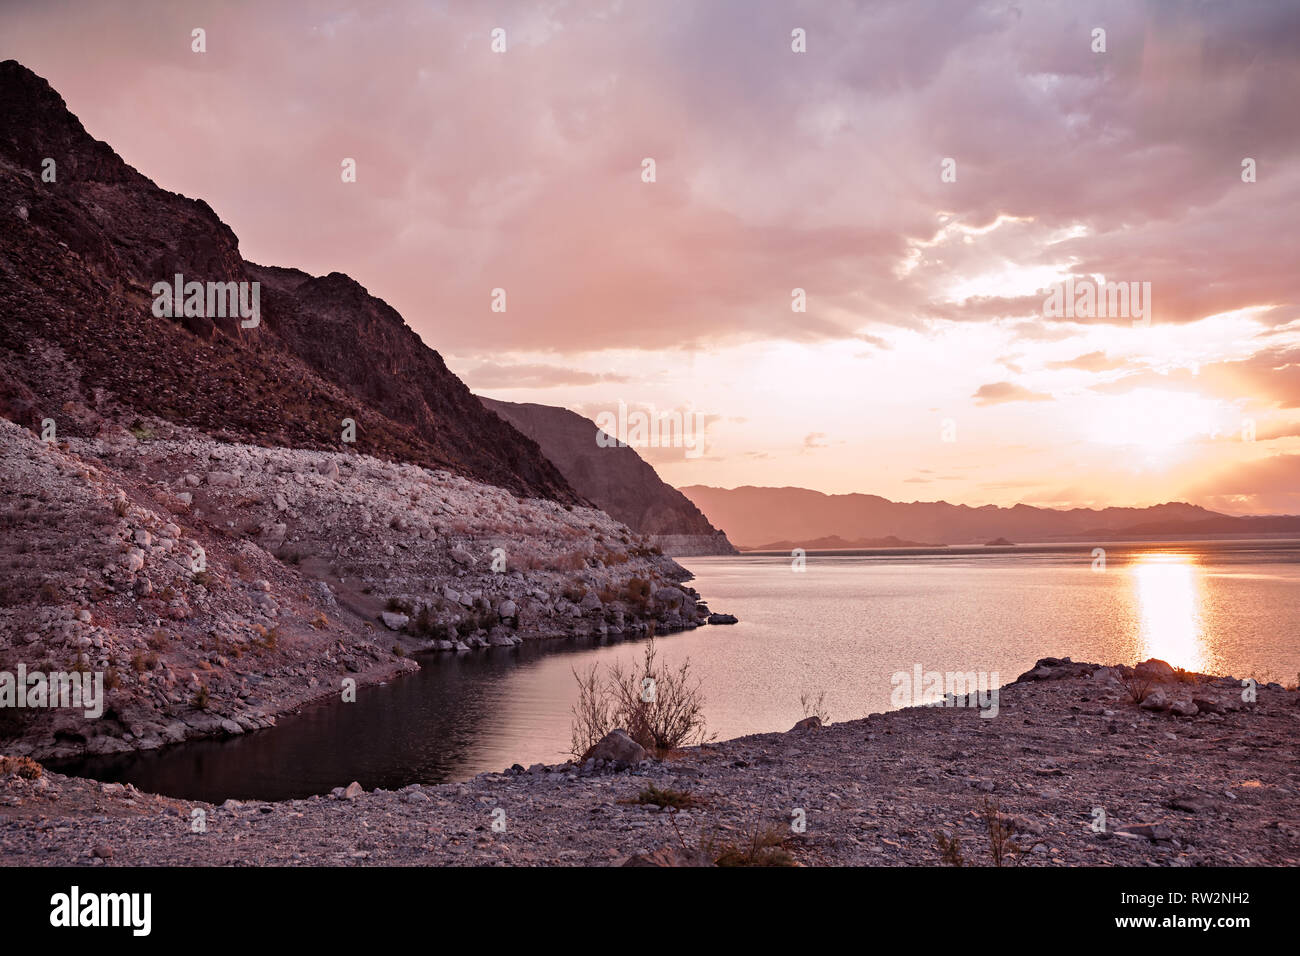 Scenic Sunset At Lake Mead In Nevada, USA Stock Photo